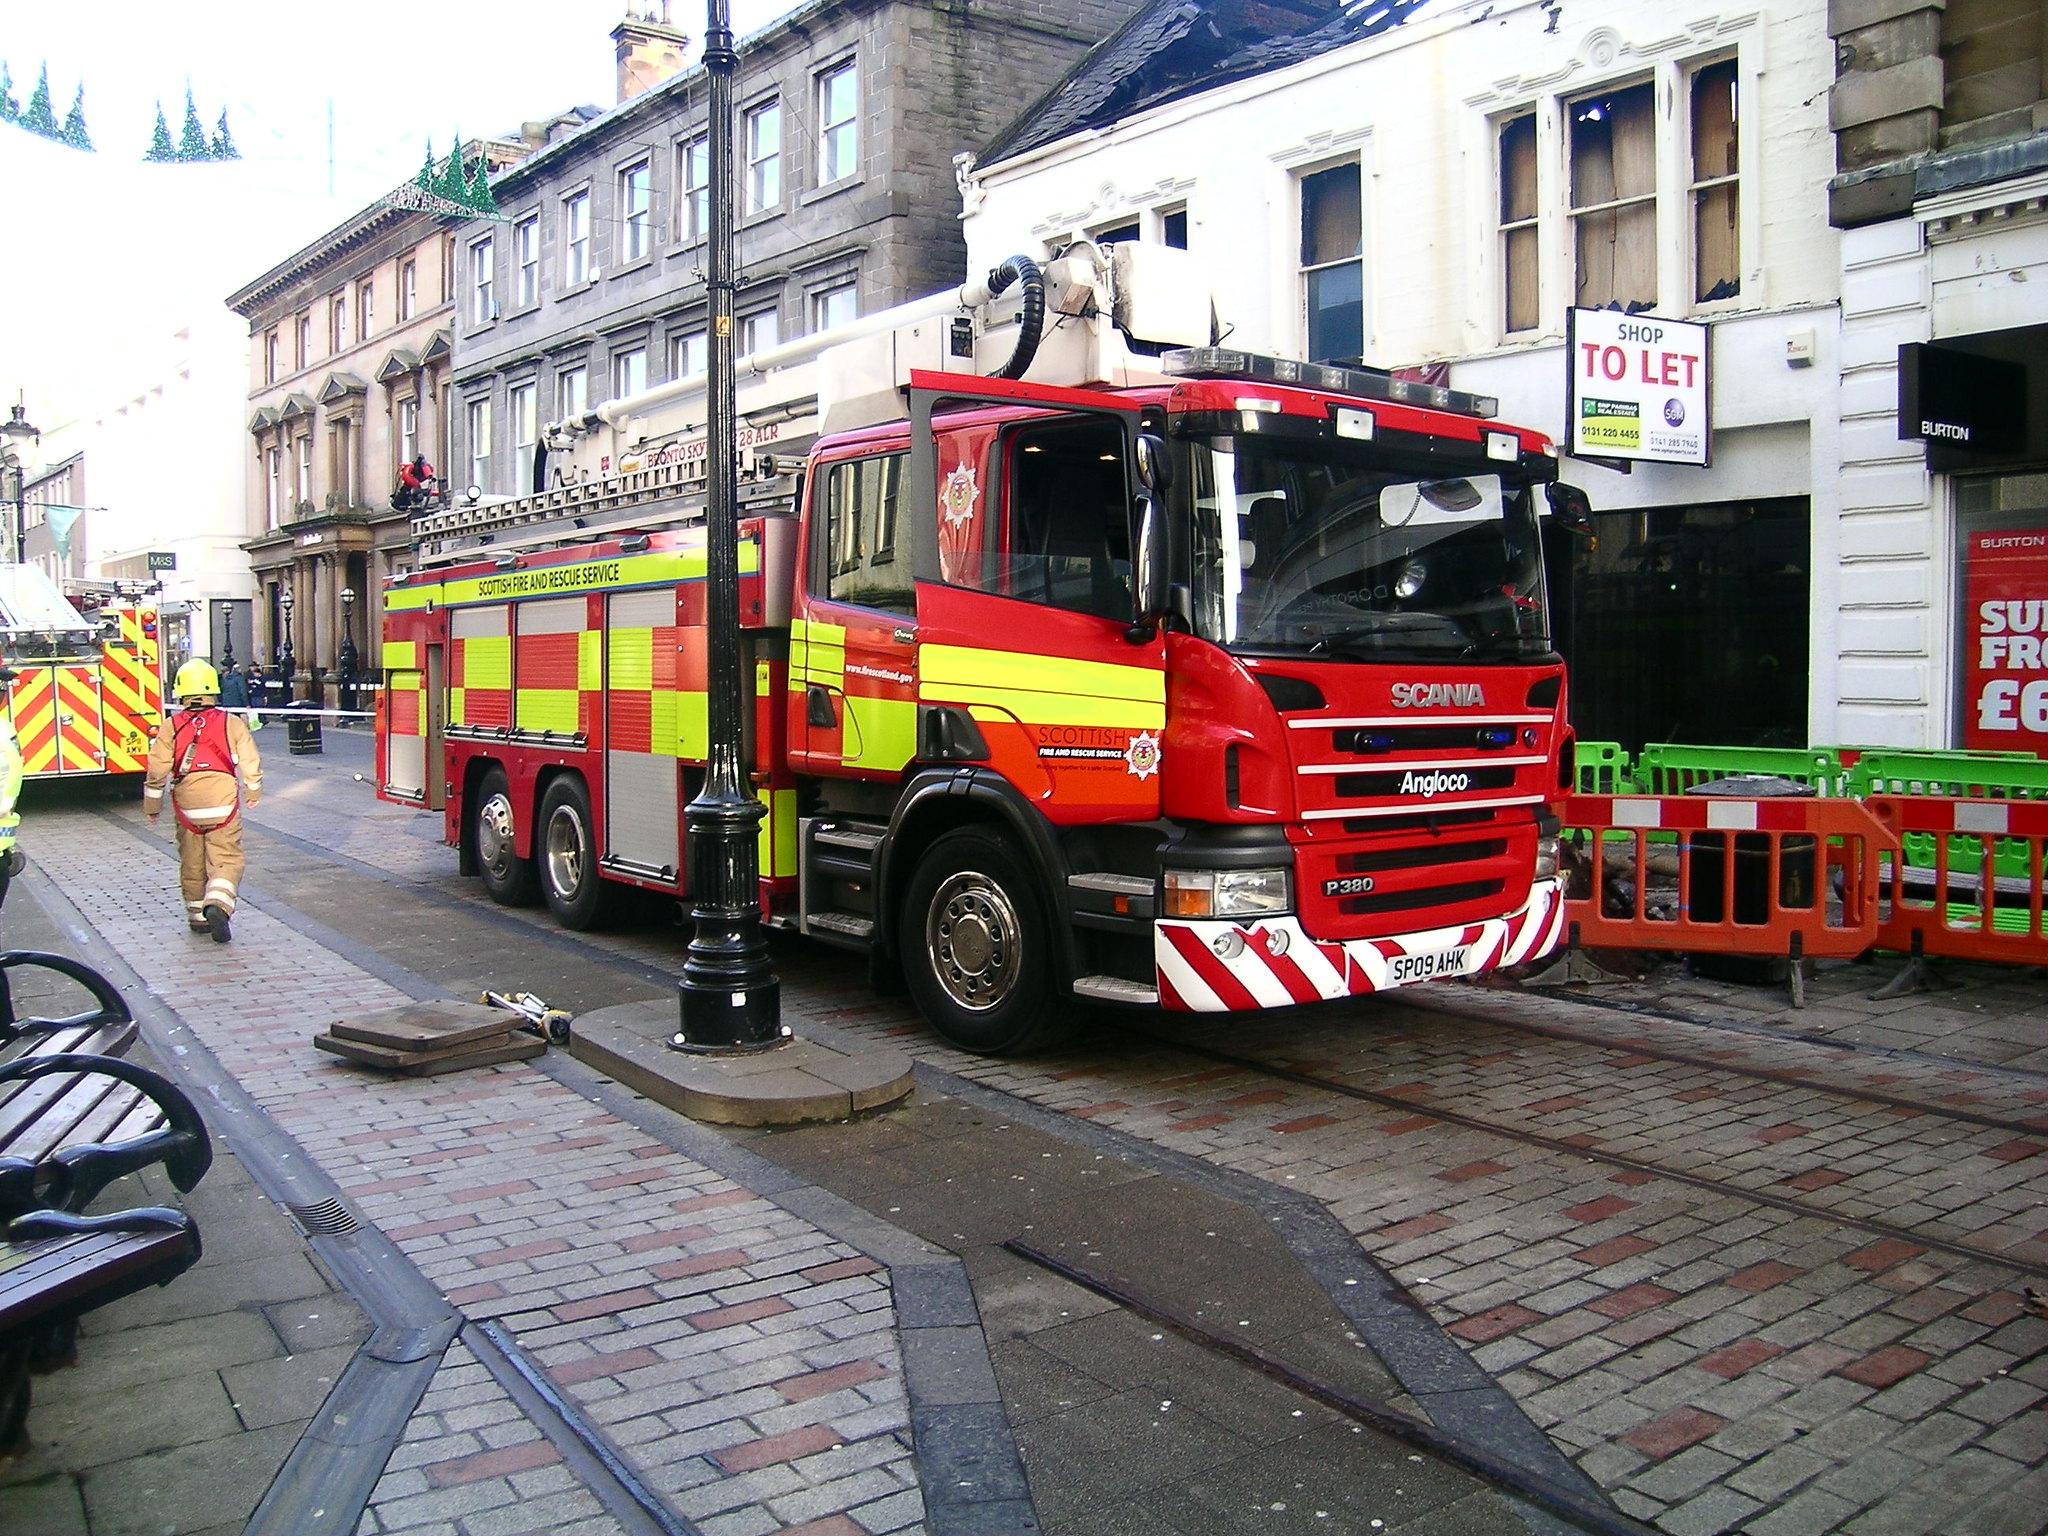 A fire engine with yellow Battenburg stripes.